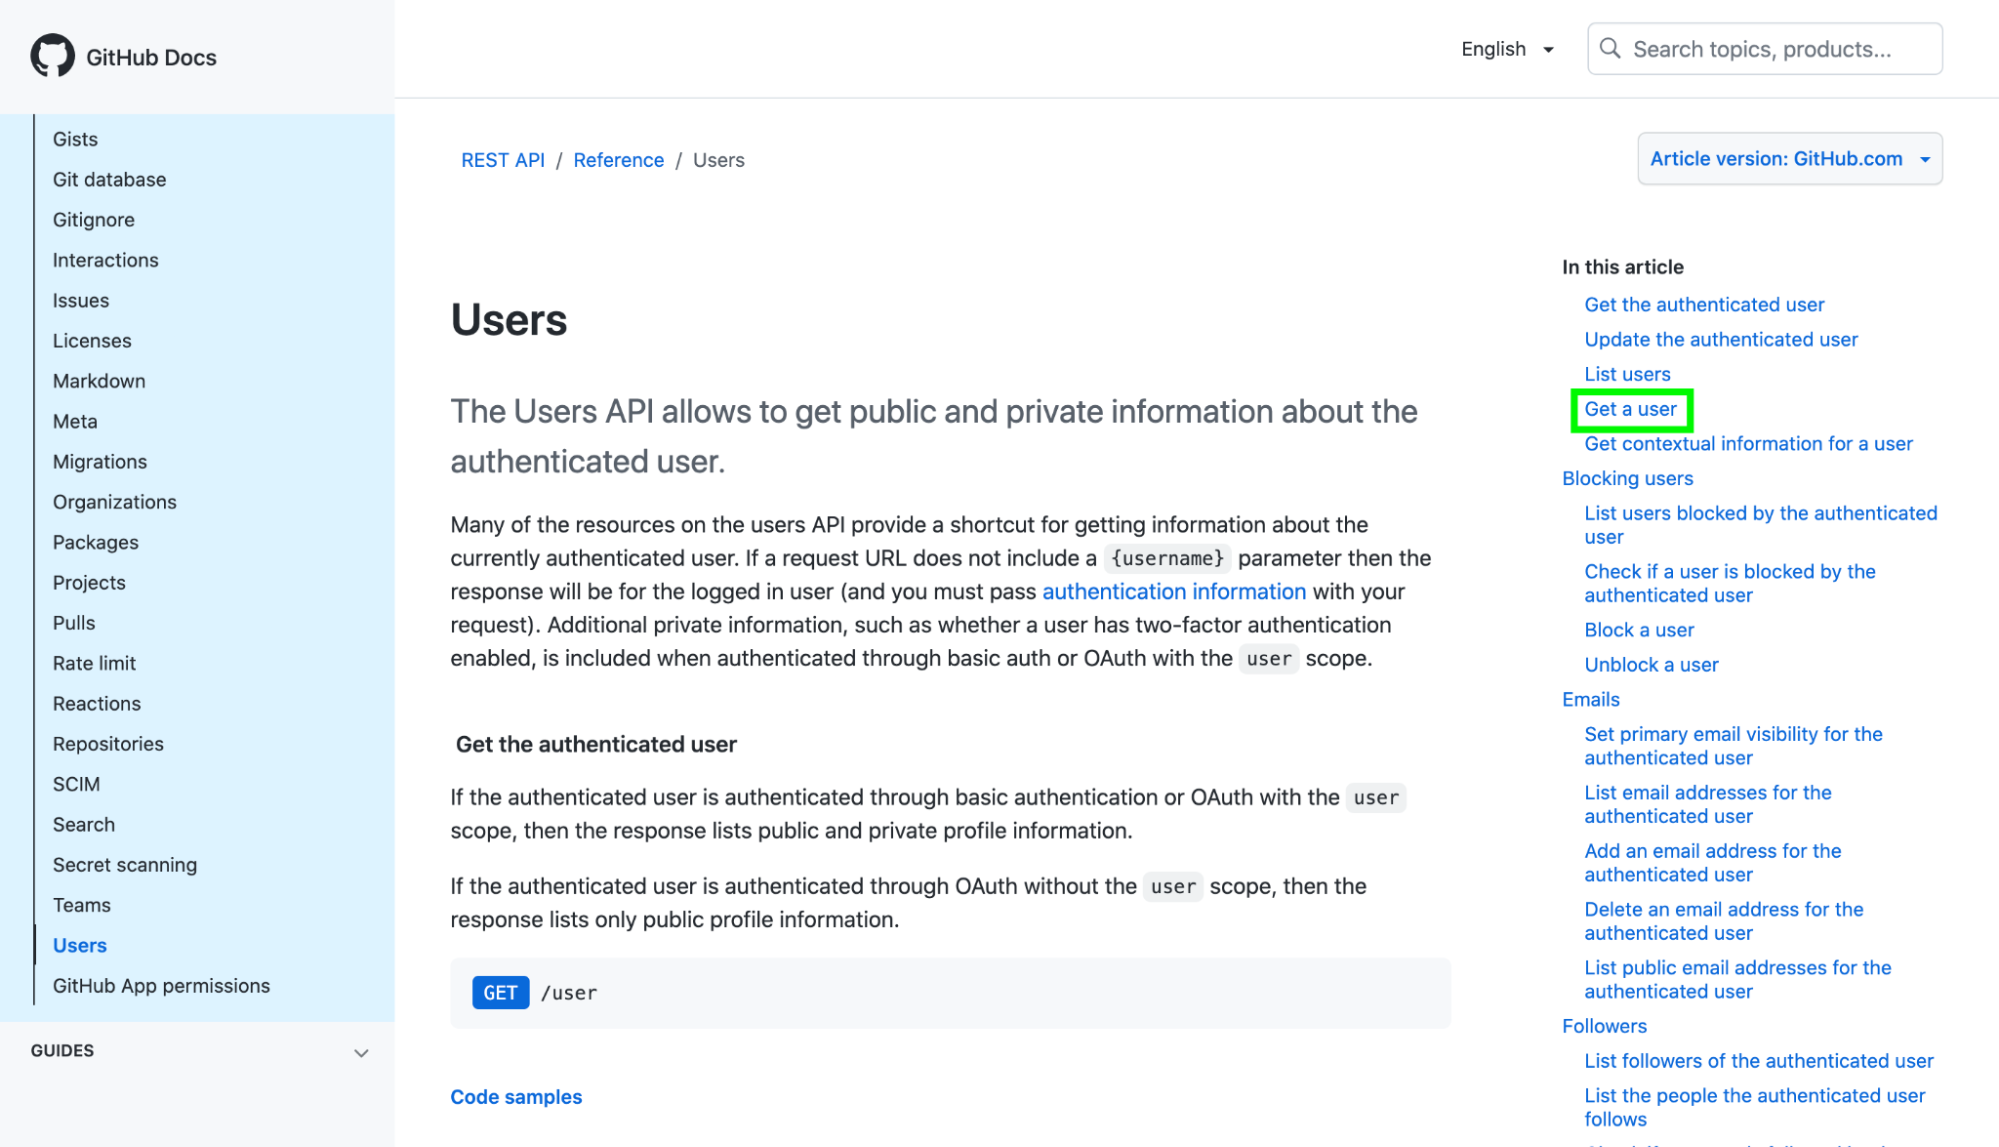 The GitHub documentation is displayed. On the right, Get a user is framed in green.